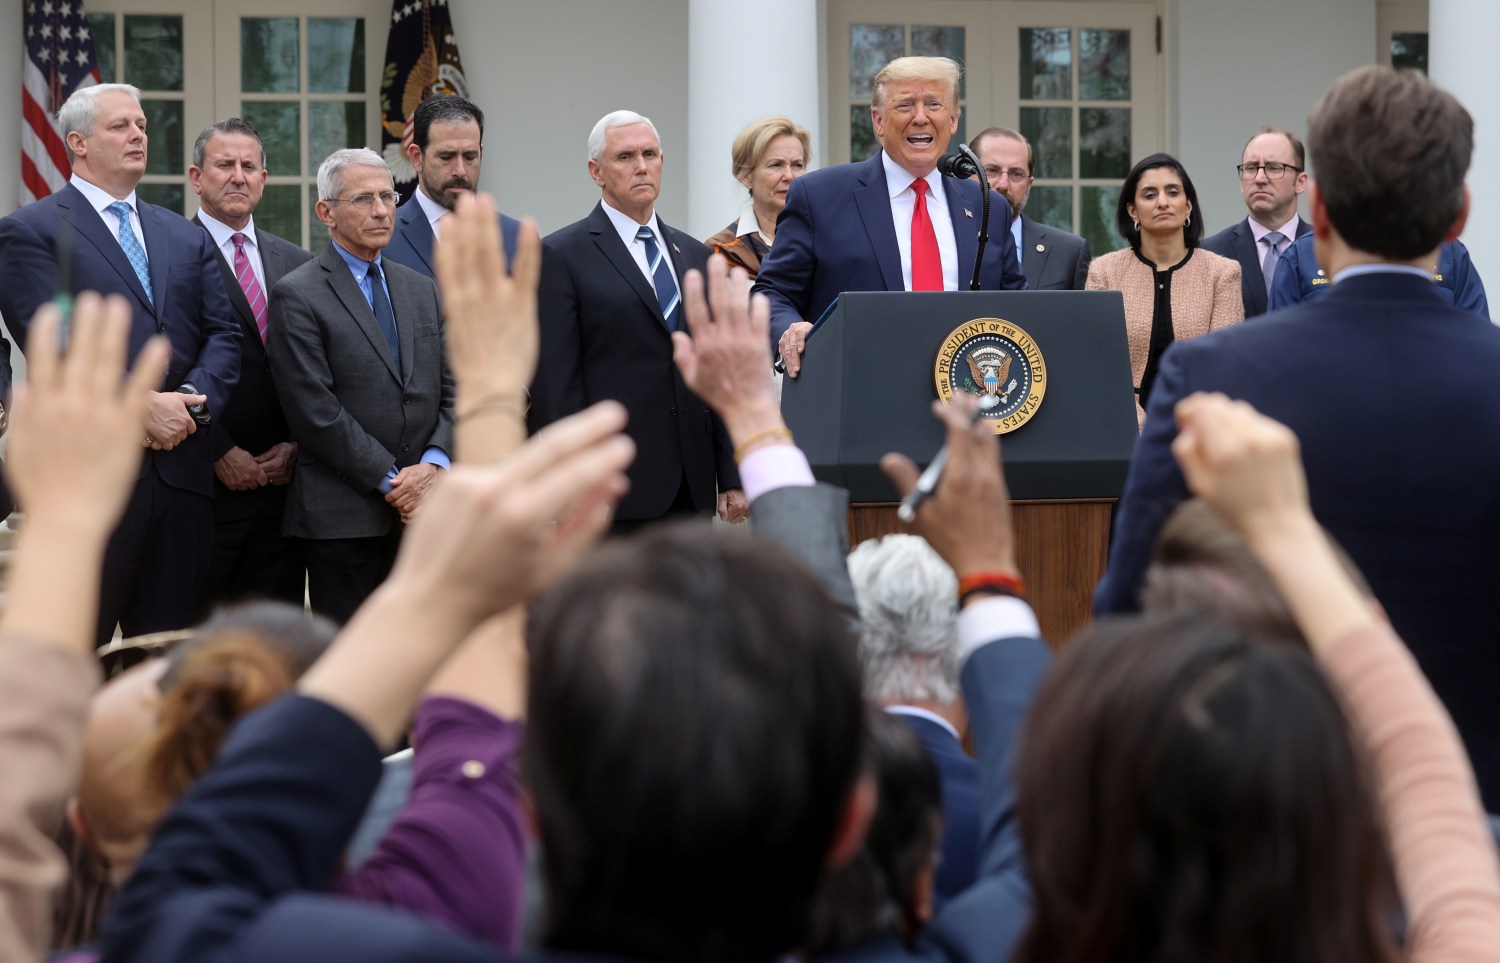 U.S. President Donald Trump is accompanied by National Institute of Allergy and Infectious Diseases Director Anthony Fauci, coronavirus task force members and industry executives as he takes questions at a news conference where he declared the coronavirus pandemic a national emergency in the Rose Garden of the White House in Washington, U.S., March 13, 2020. REUTERS/Jonathan Ernst